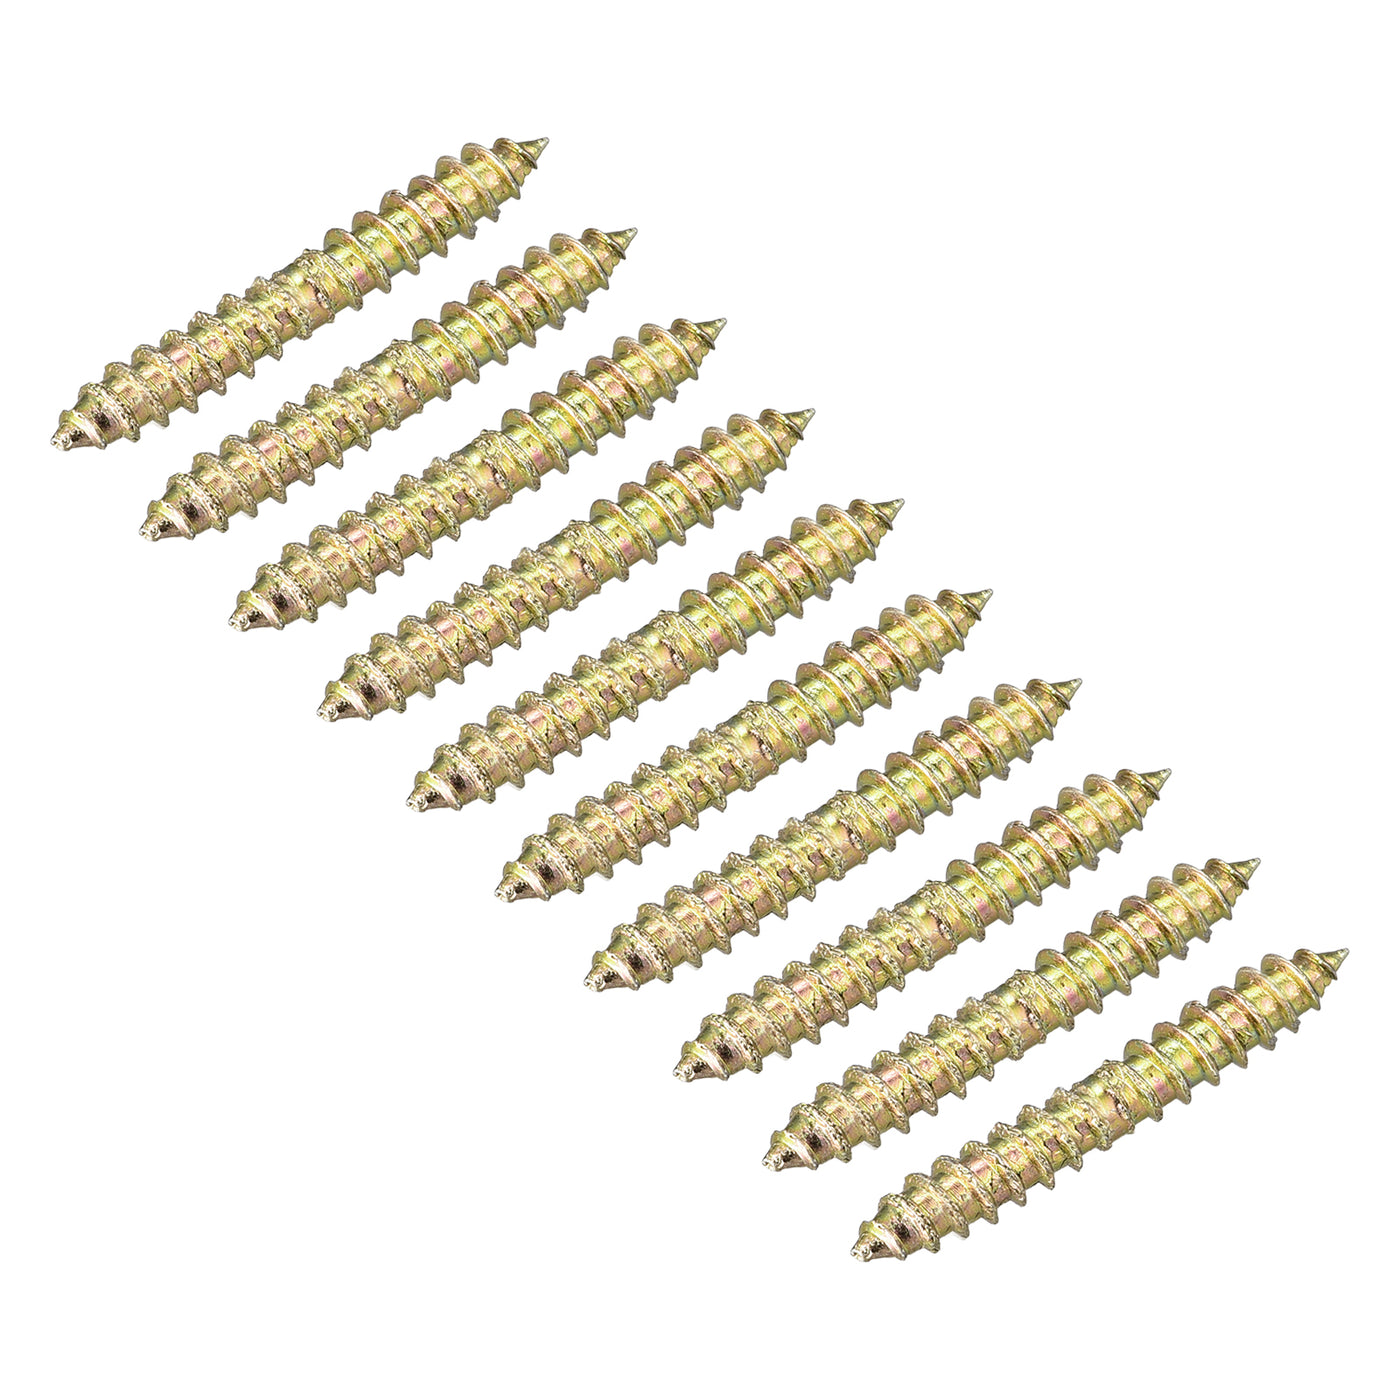 Uxcell Uxcell 4x13mm Hanger Bolts, 48pcs Double Ended Self-Tapping Thread Dowel Screws